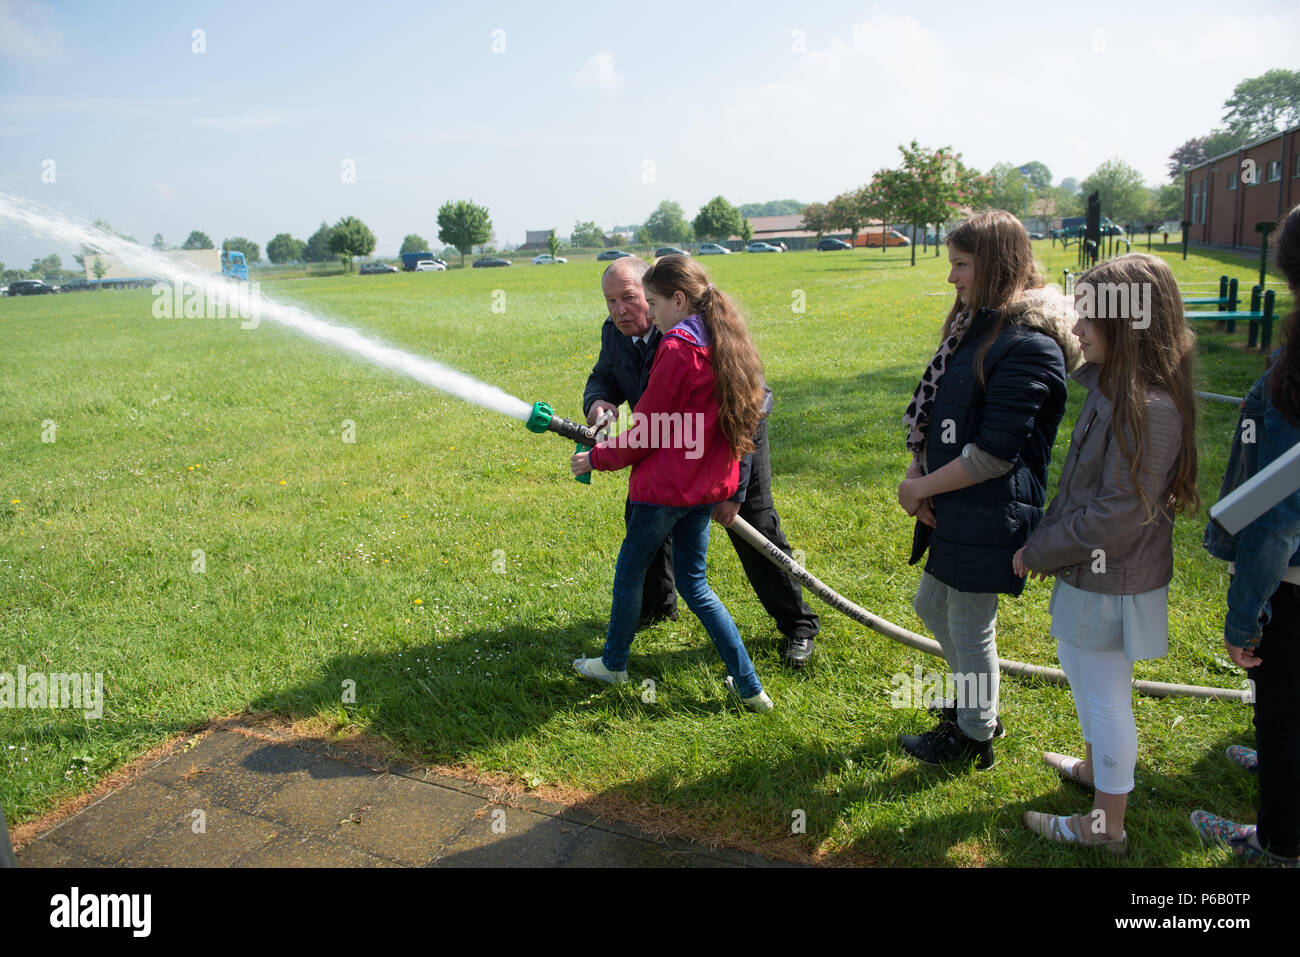 Belgian schoolchilds from the Lens elementary school stand in line to hold a fire hose during USAG Benelux safety day, on Chièvres Air Base, Chièvres, Belgium, May 26, 2016. (U.S. Army photo by Visual Information Specialist Pierre-Etienne Courtejoie/Released) Stock Photo